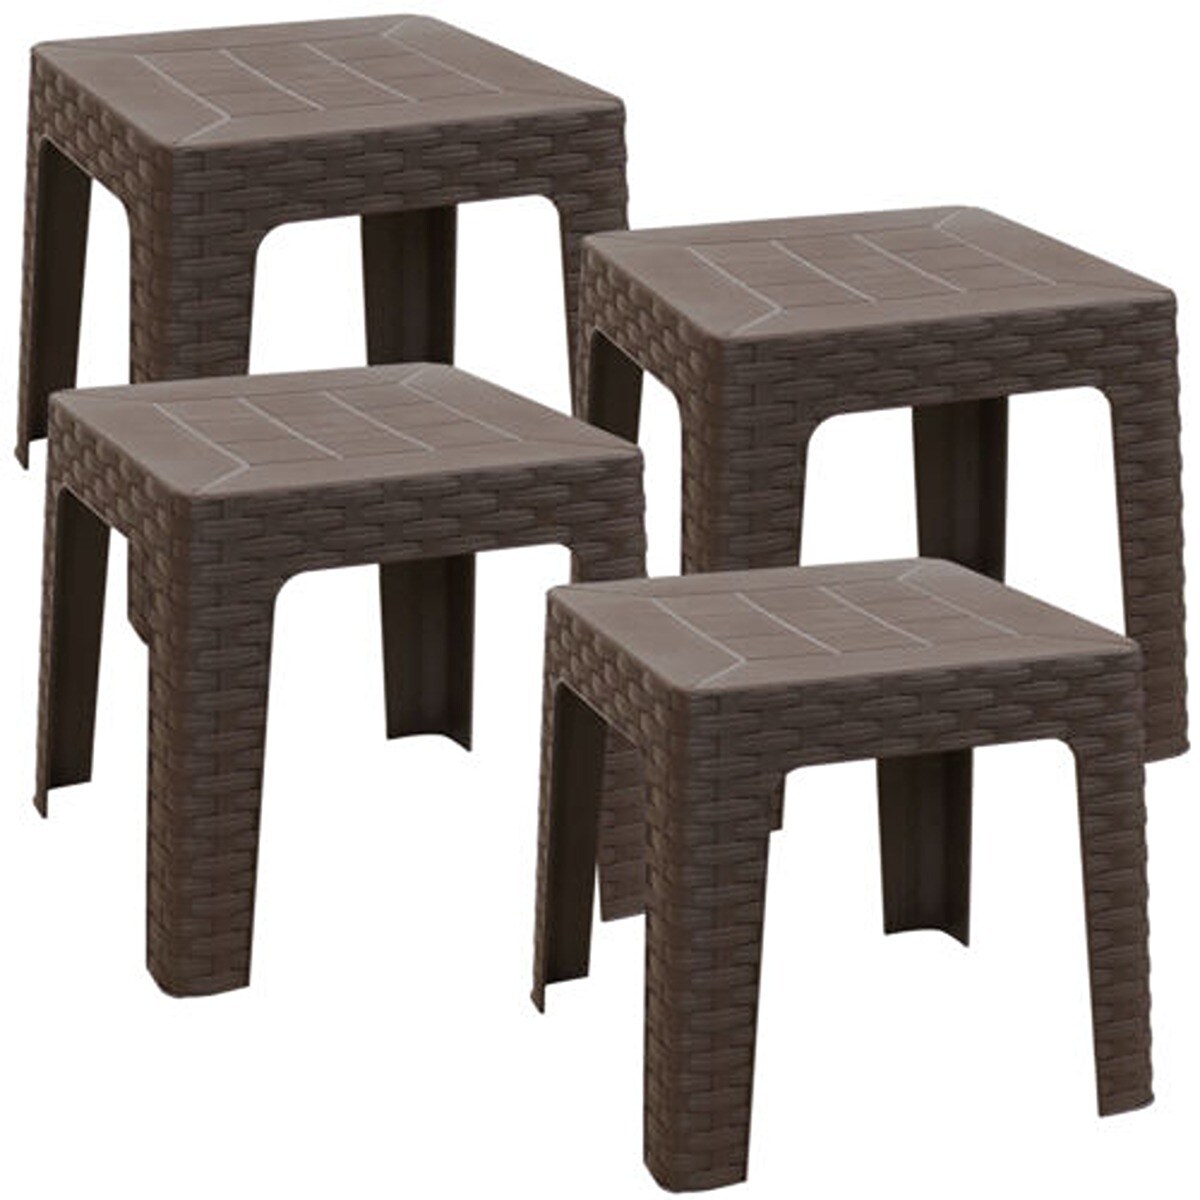 18.5 Inches Square Patio Side Table Set of 4